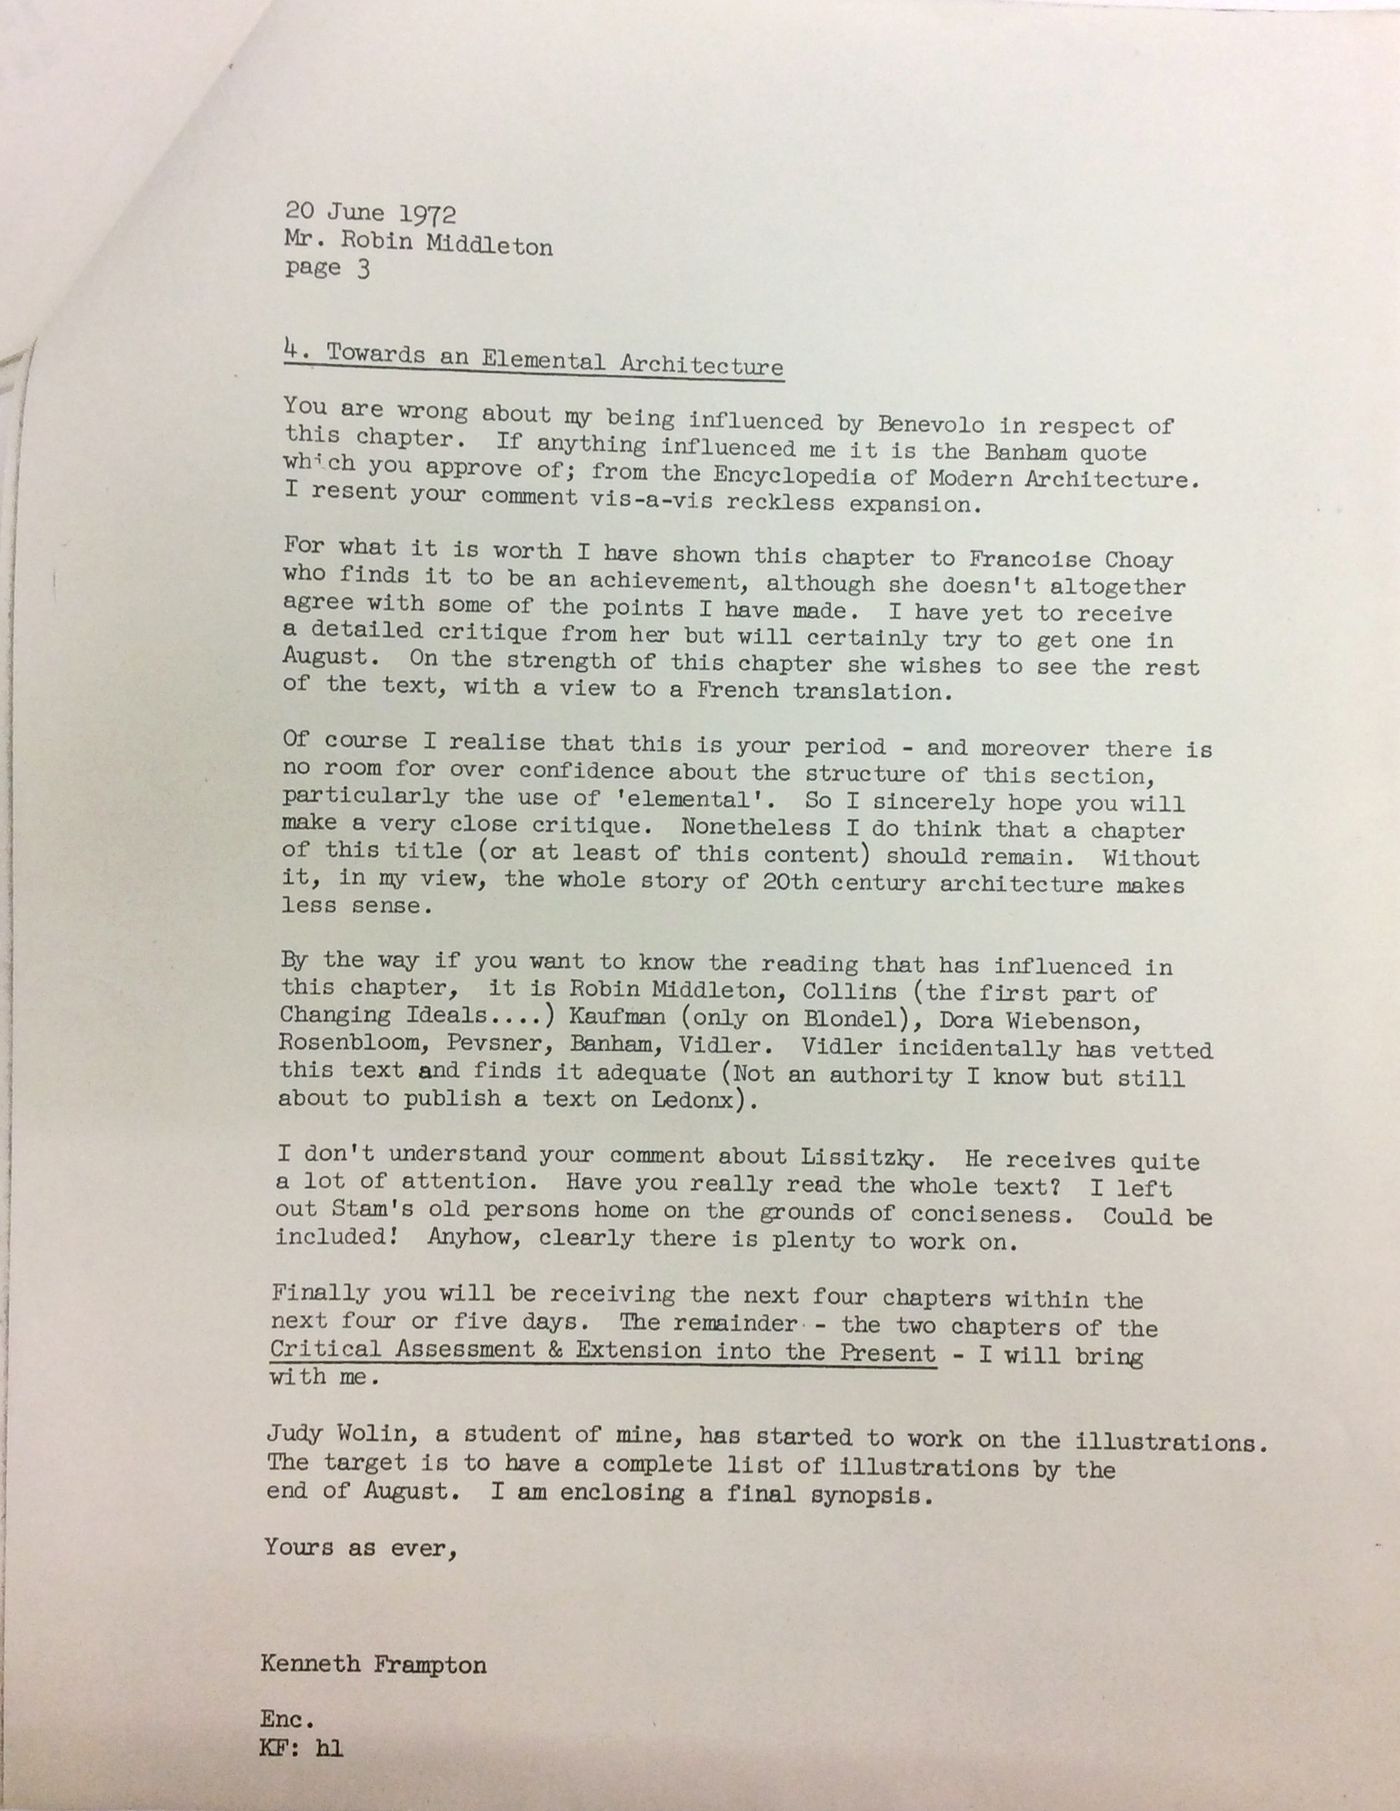 Letter from Kenneth Frampton to Robin Middleton about "Modern Architecture: A Critical History" comments